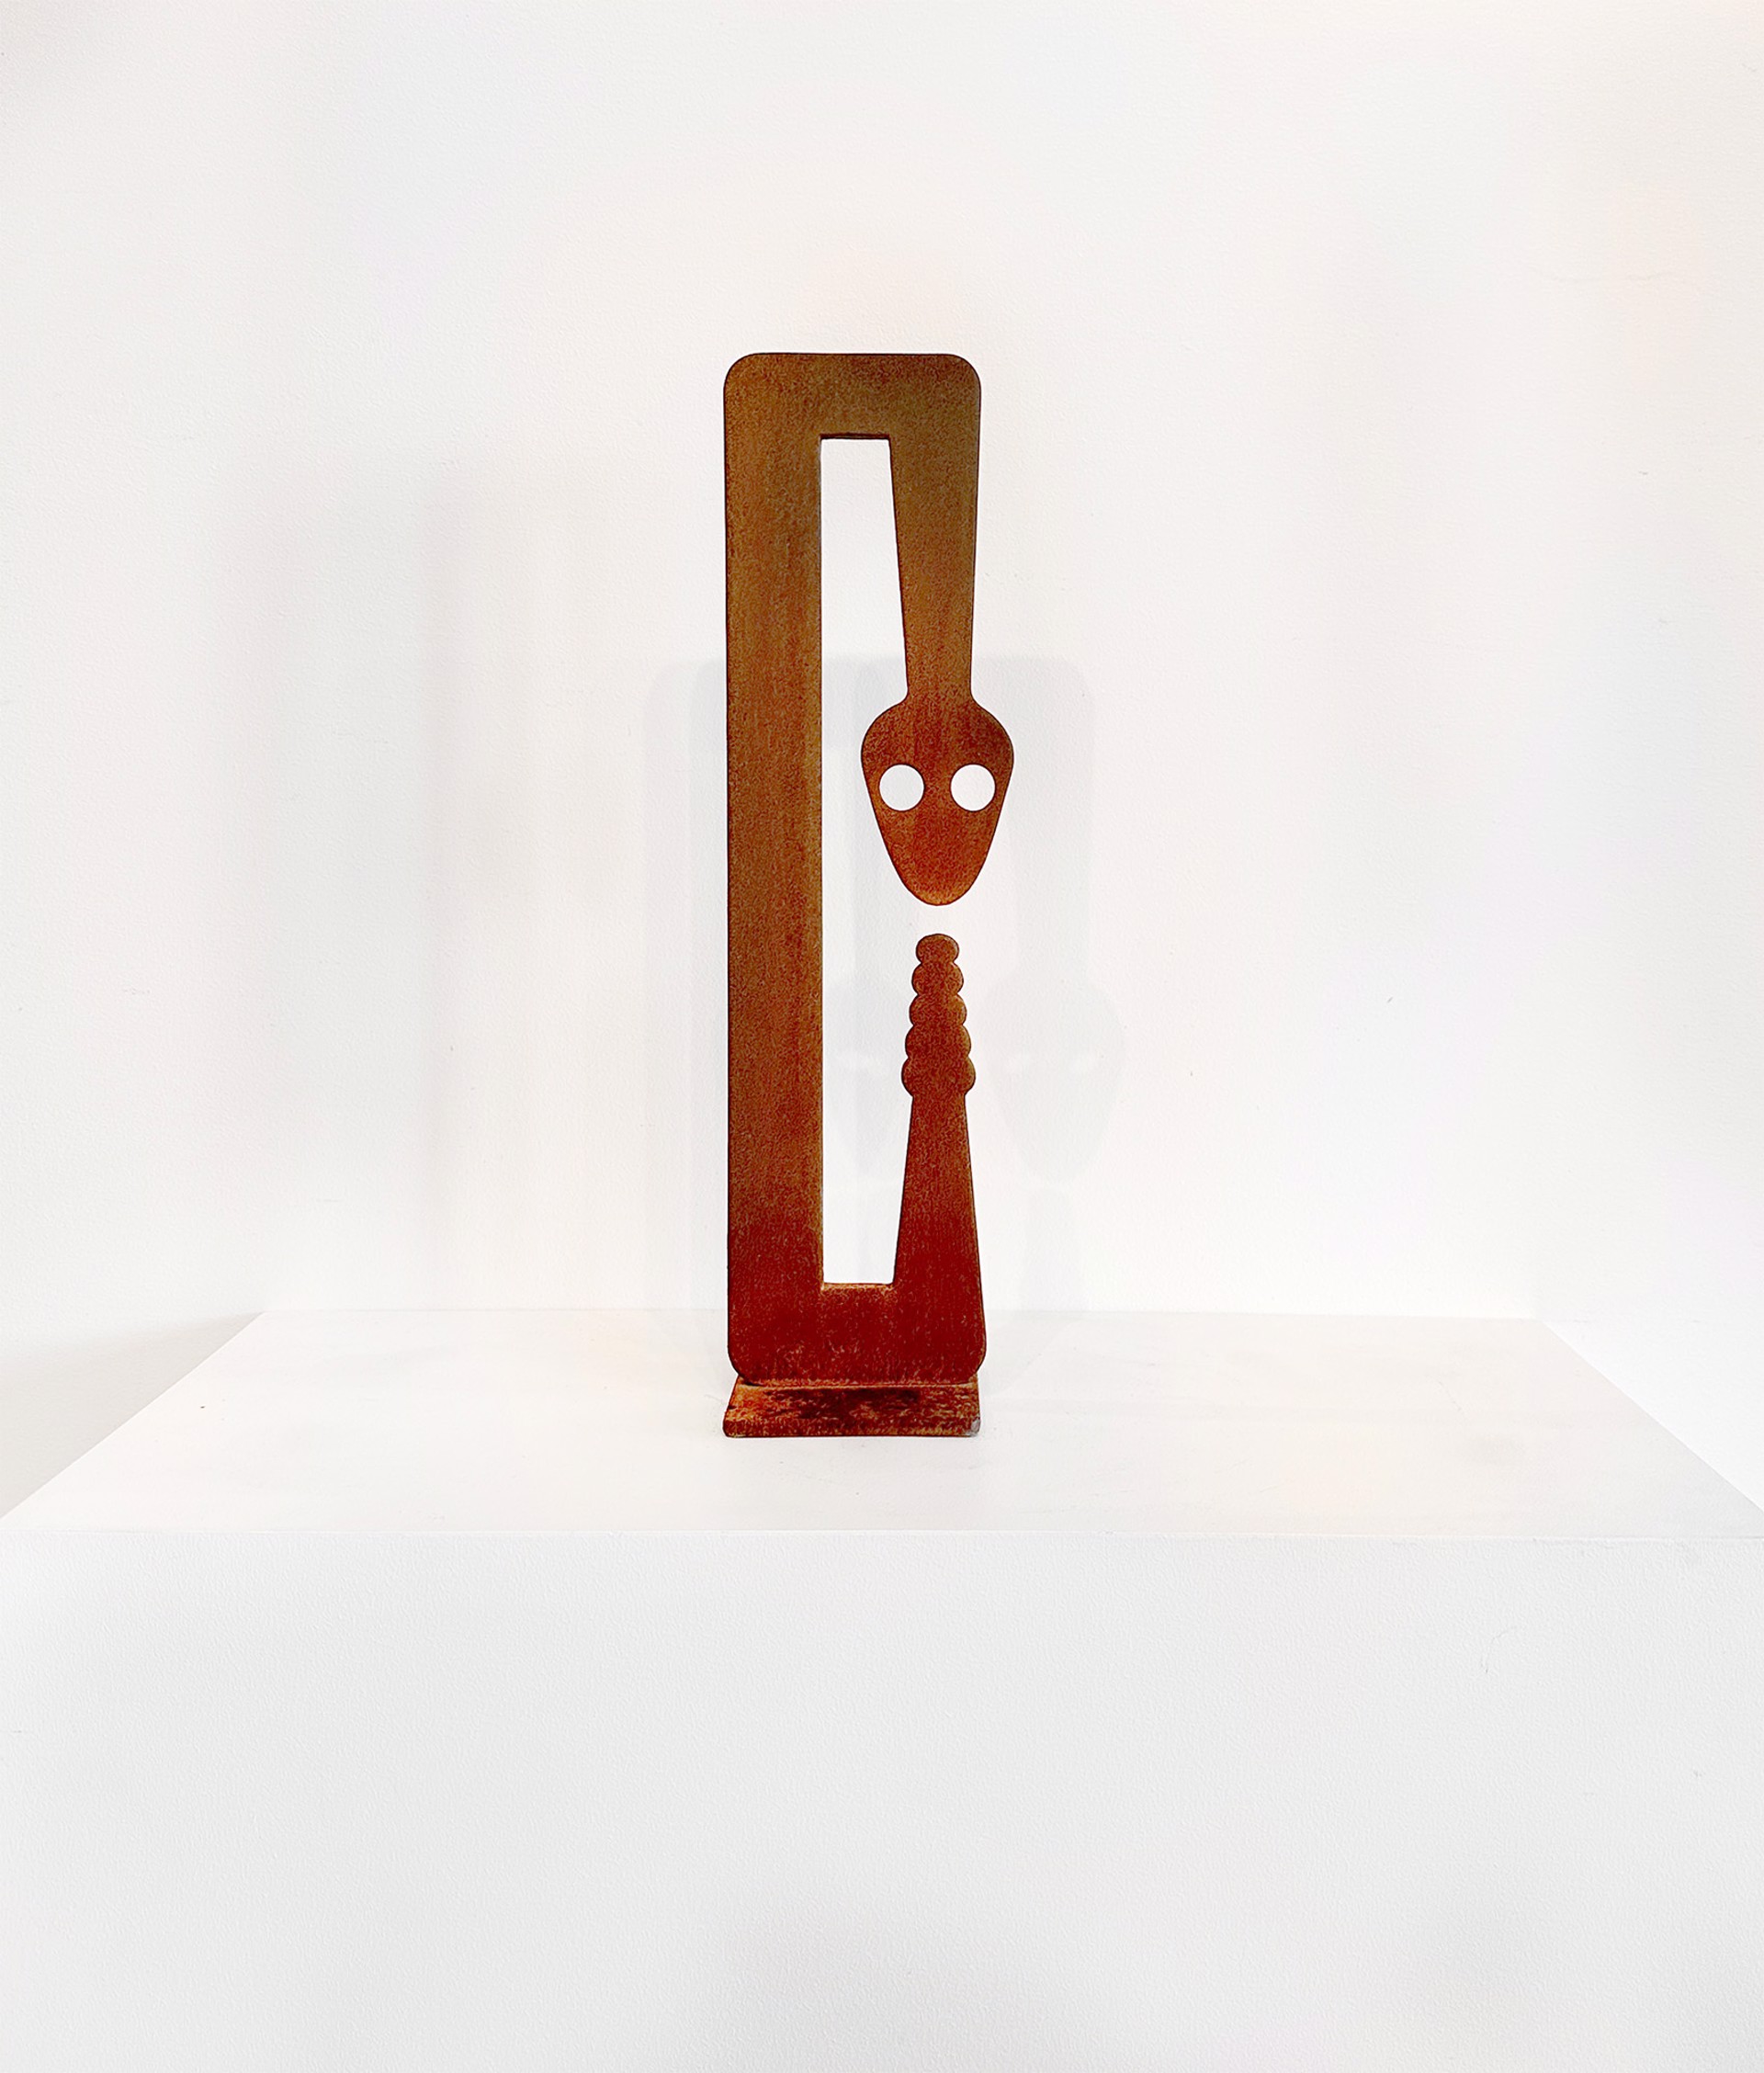 Steel Sculpture By Jeffie Brewer Featuring An Abstracted Snake In Rust Finish